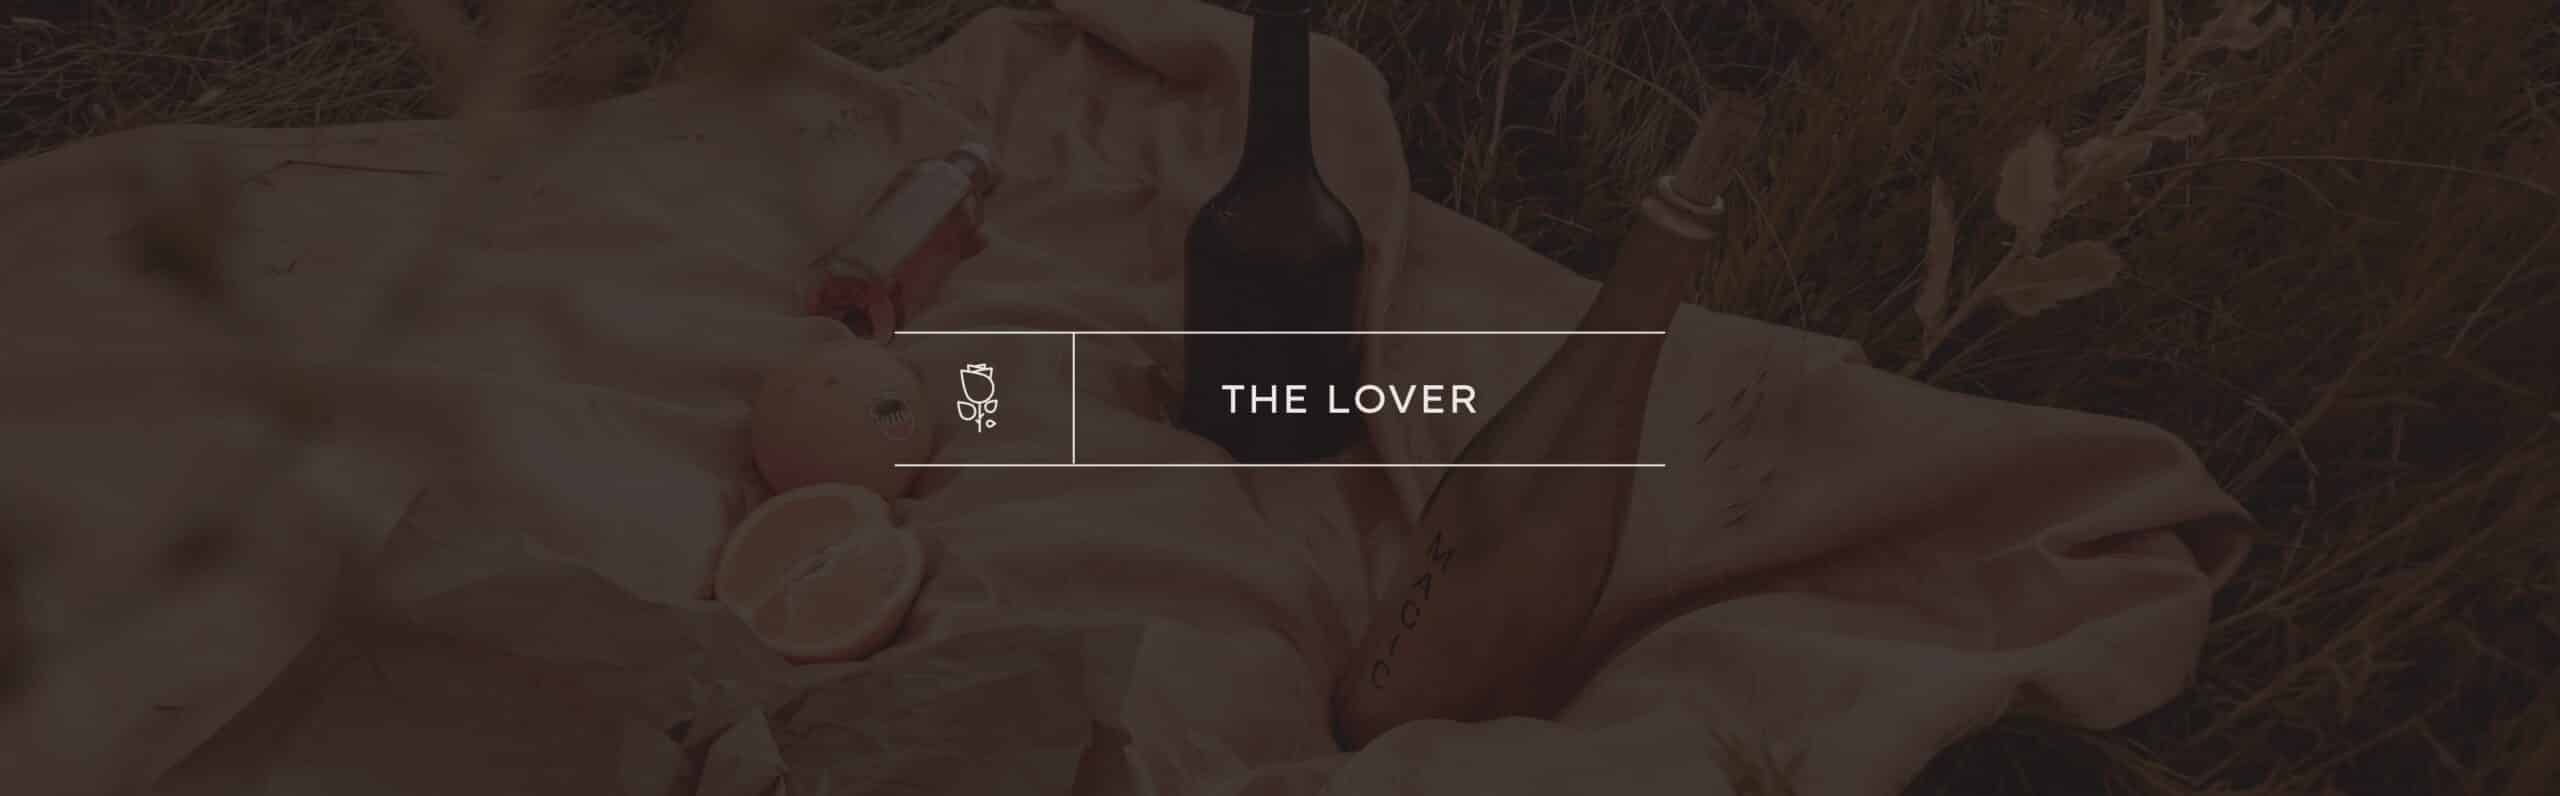 Brand Archetypes: The Lover